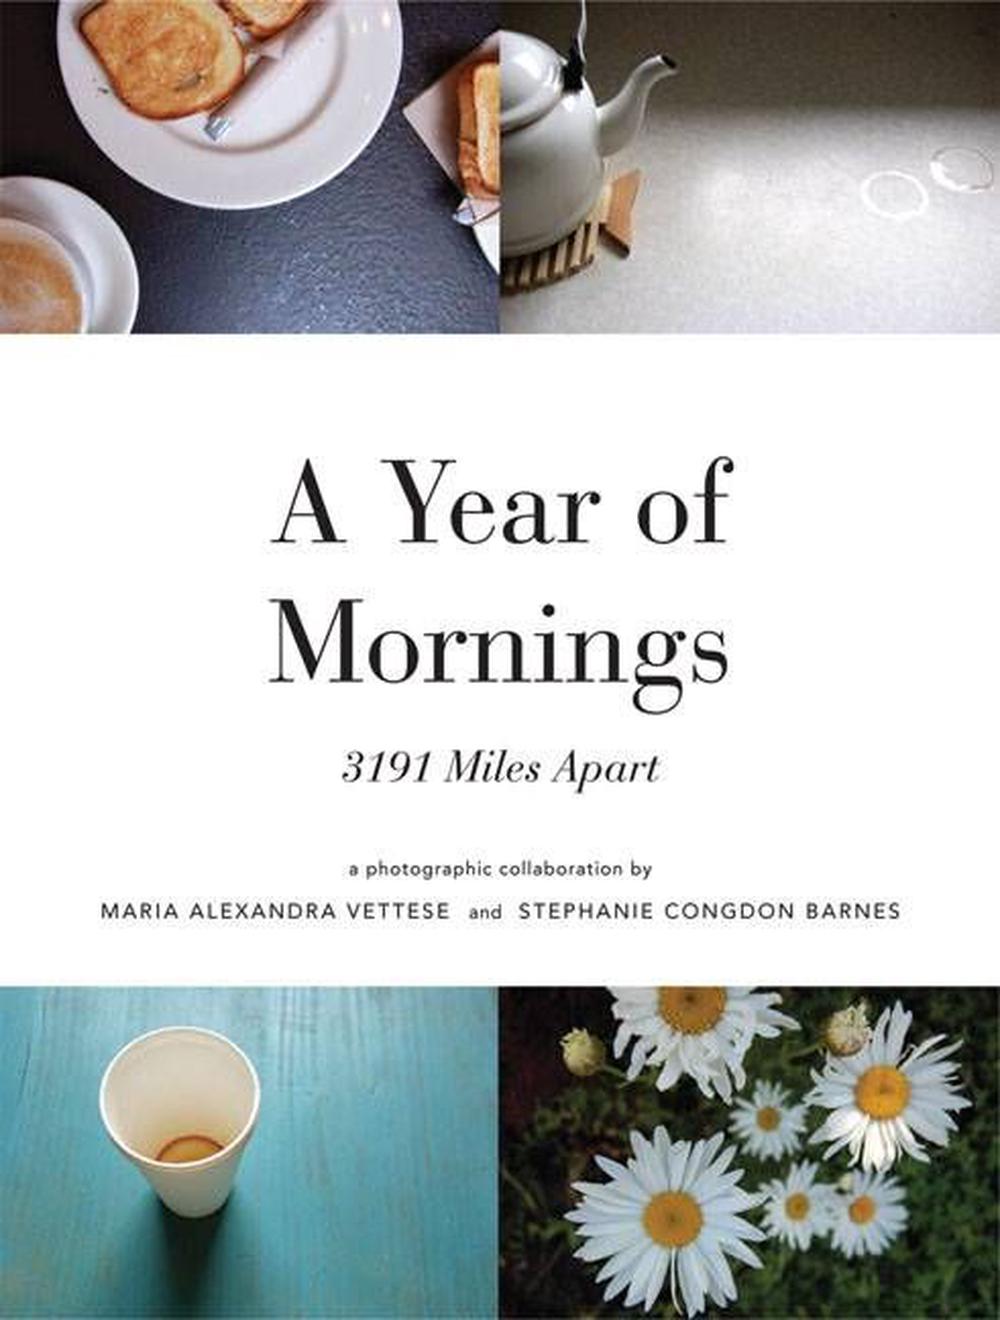 A Year of Mornings 3191 Miles Apart by Stephanie Congdon Barnes